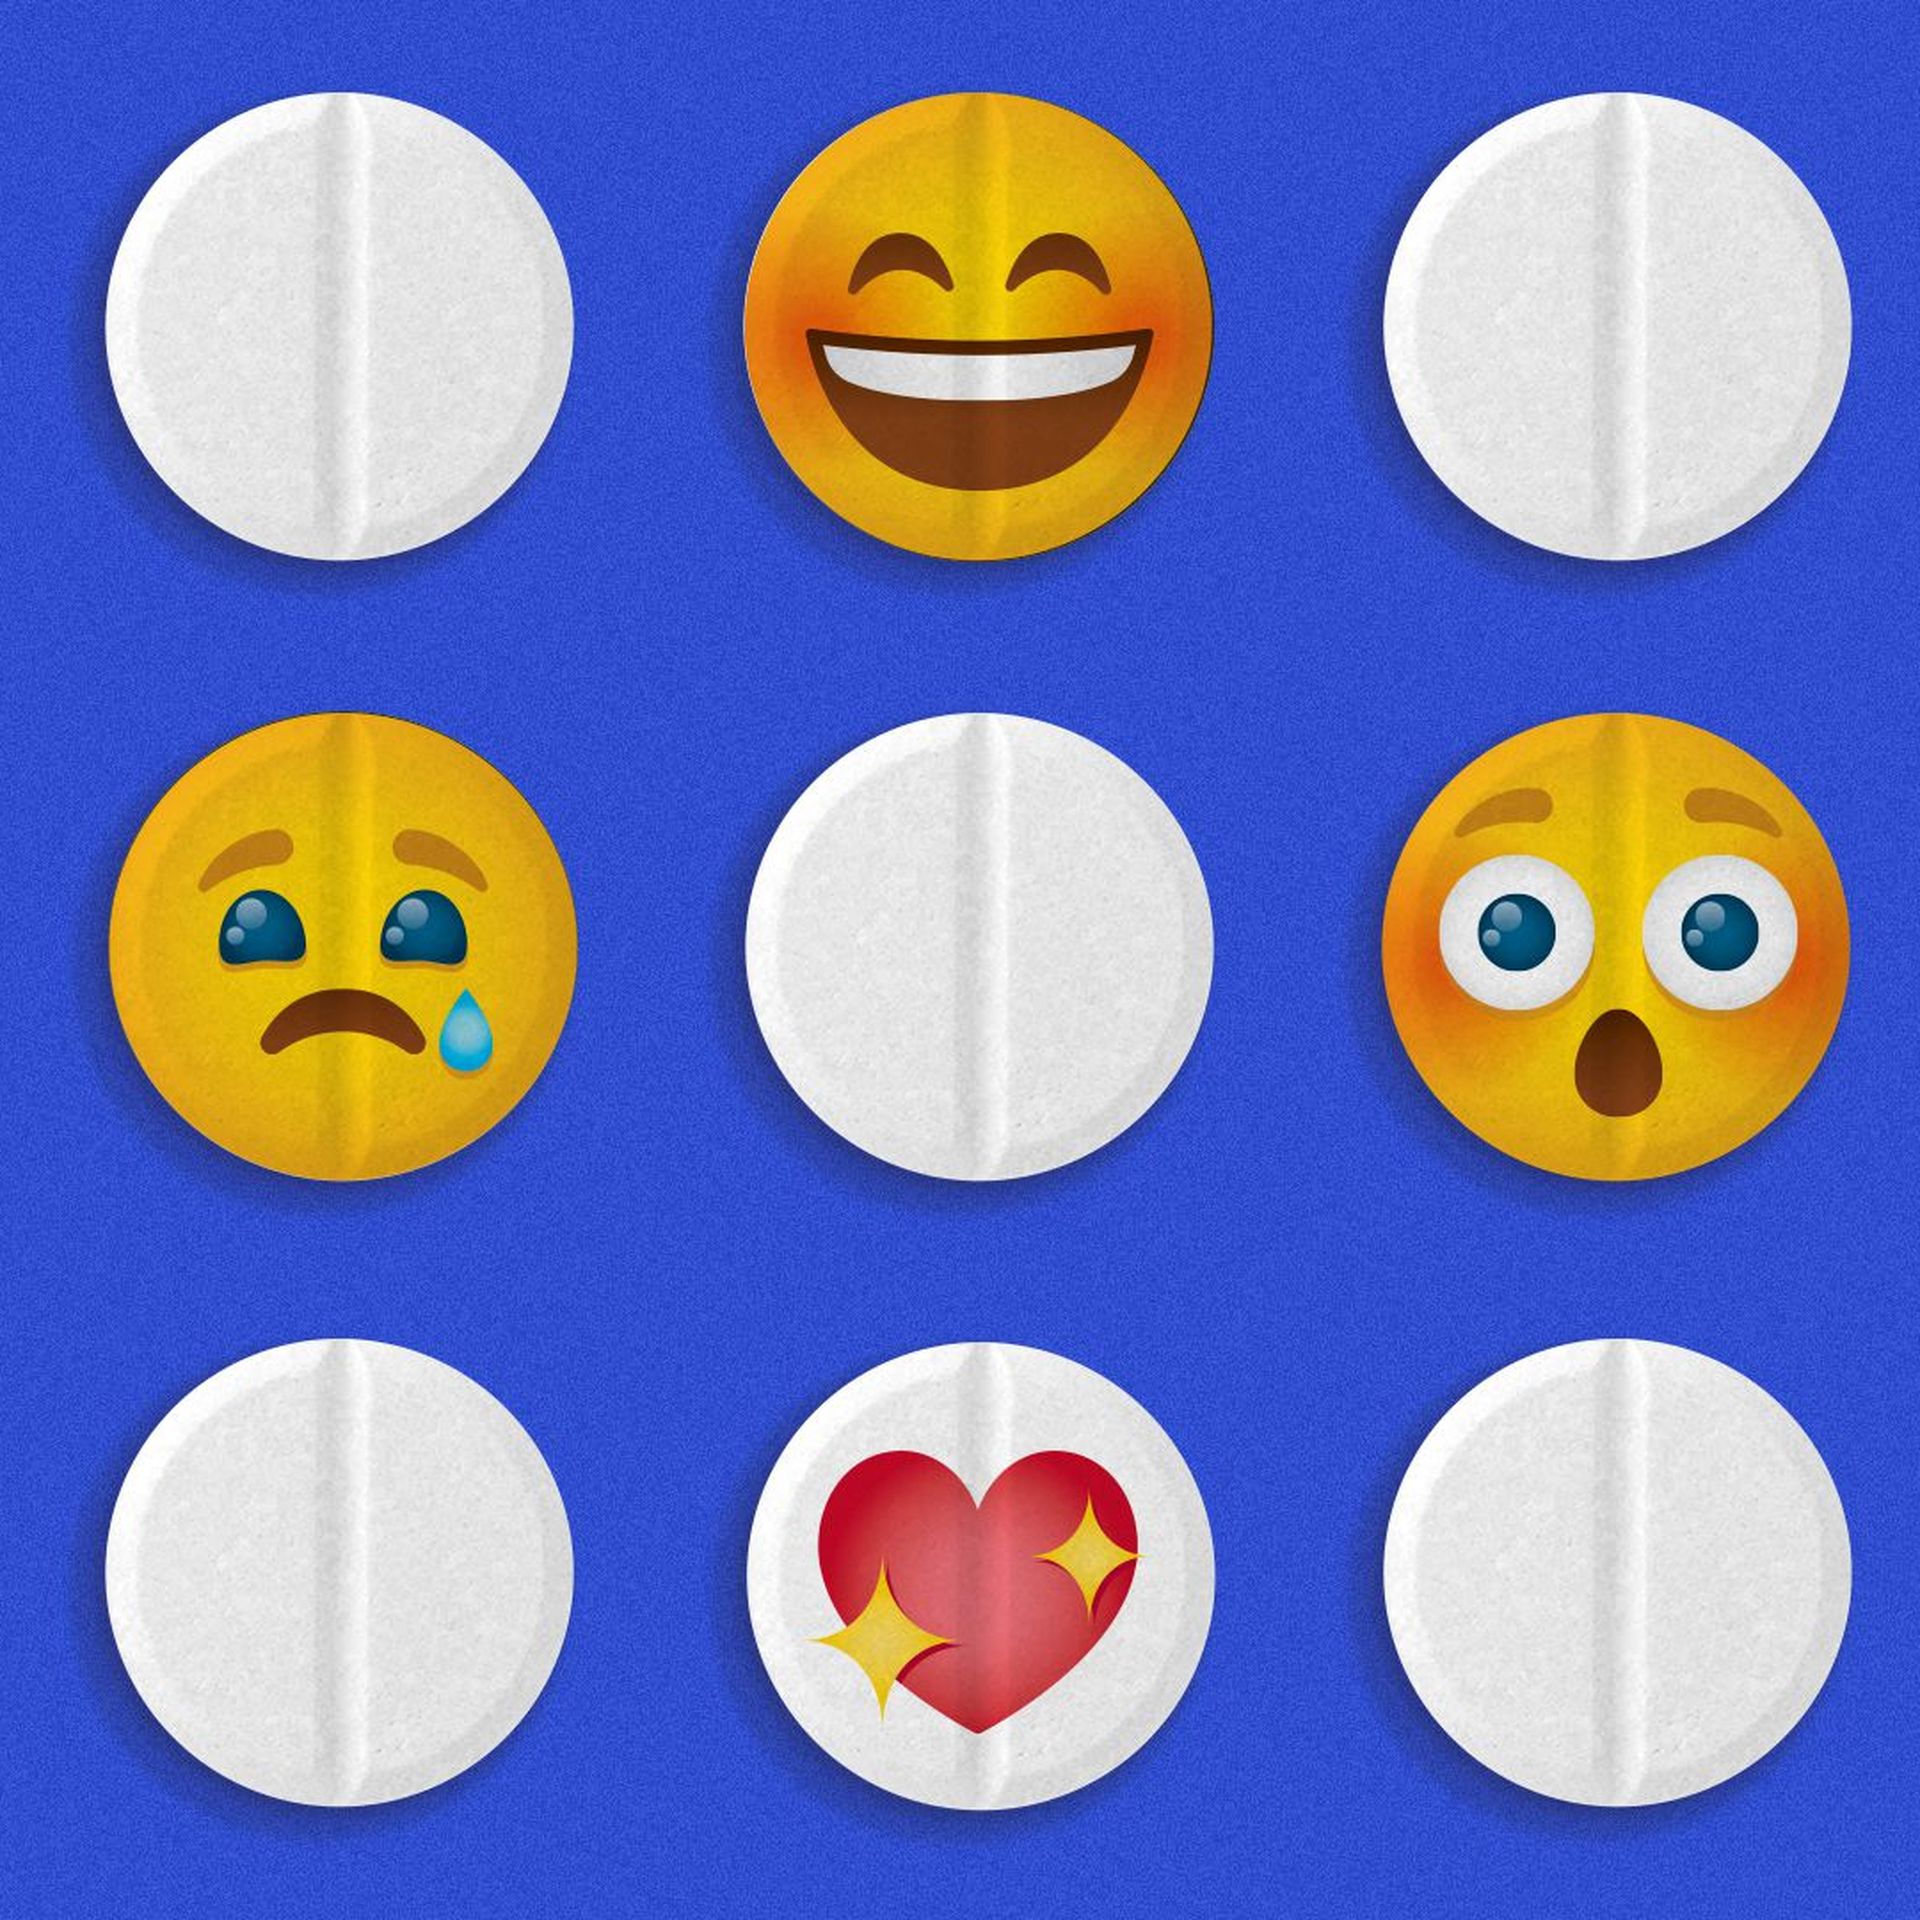 Illustration of rows of pills, some with emoji reactions.